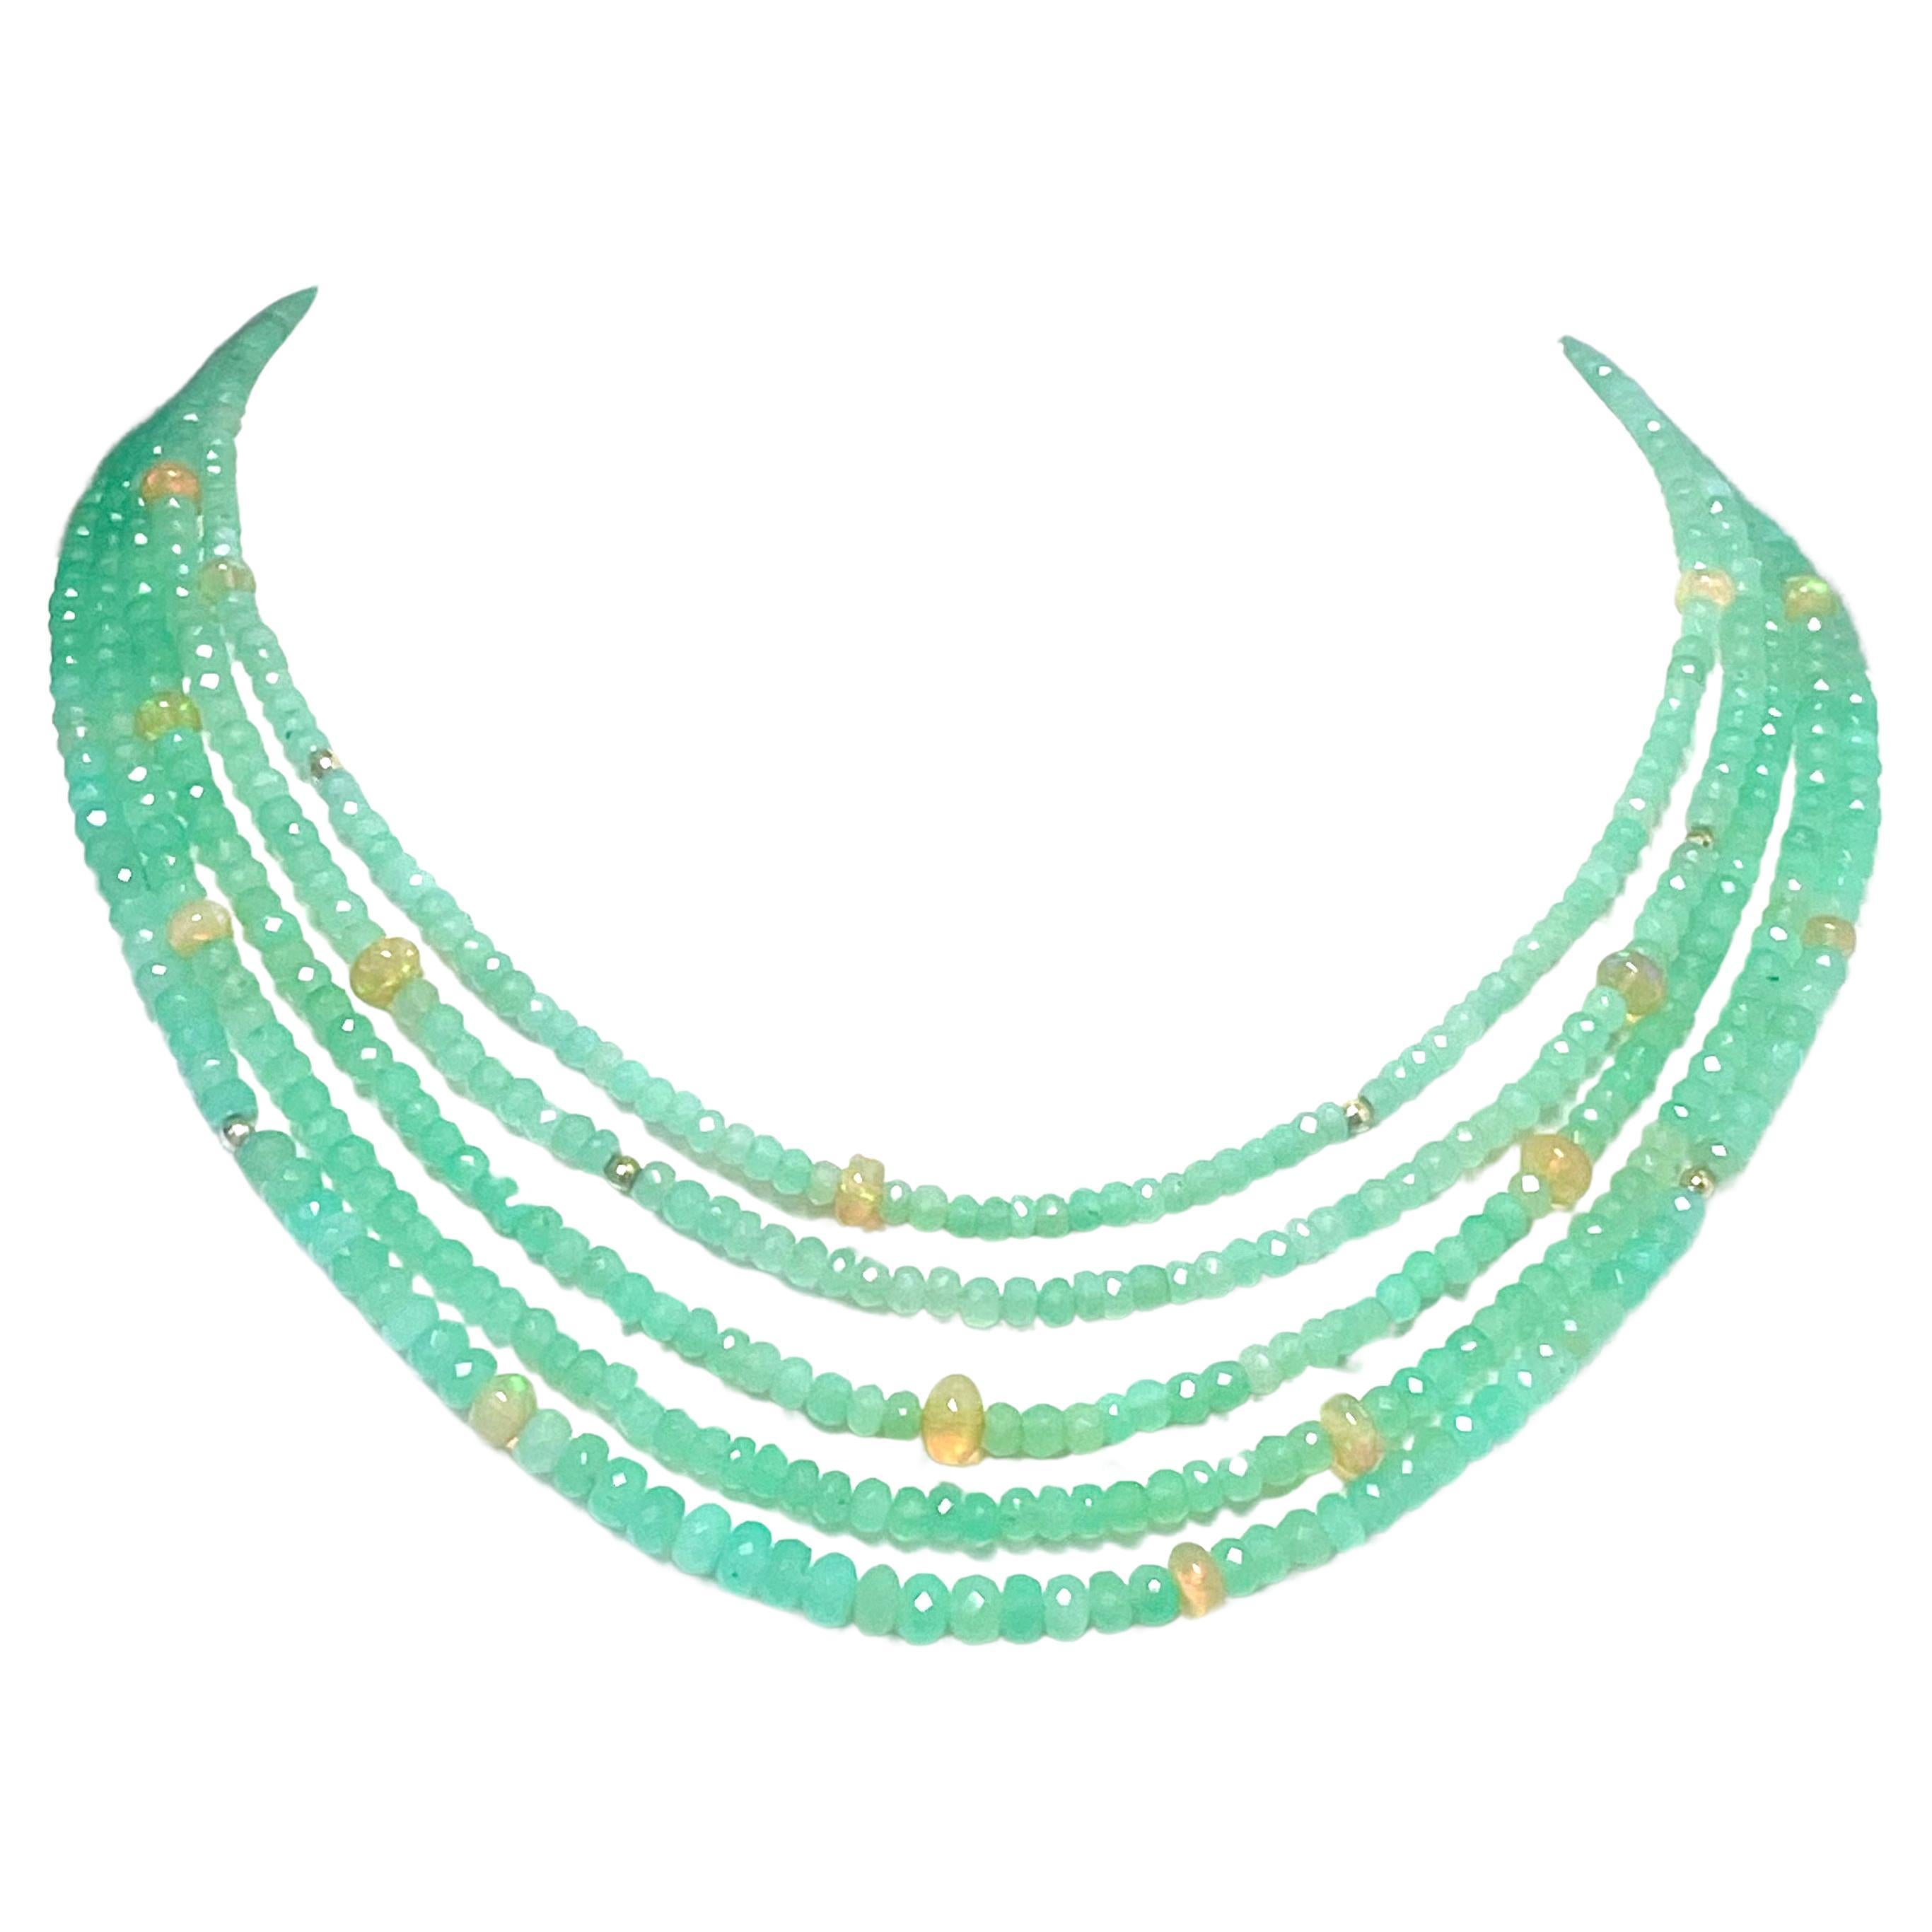 Description
Lovely soft green Chrysoprase cool as a summer breeze and delightfully compatible with fiery yellow Ethiopian Opals and twinkling faceted gold balls scattered about on five strands nested in perfect harmony… sooo subtle and feminine.